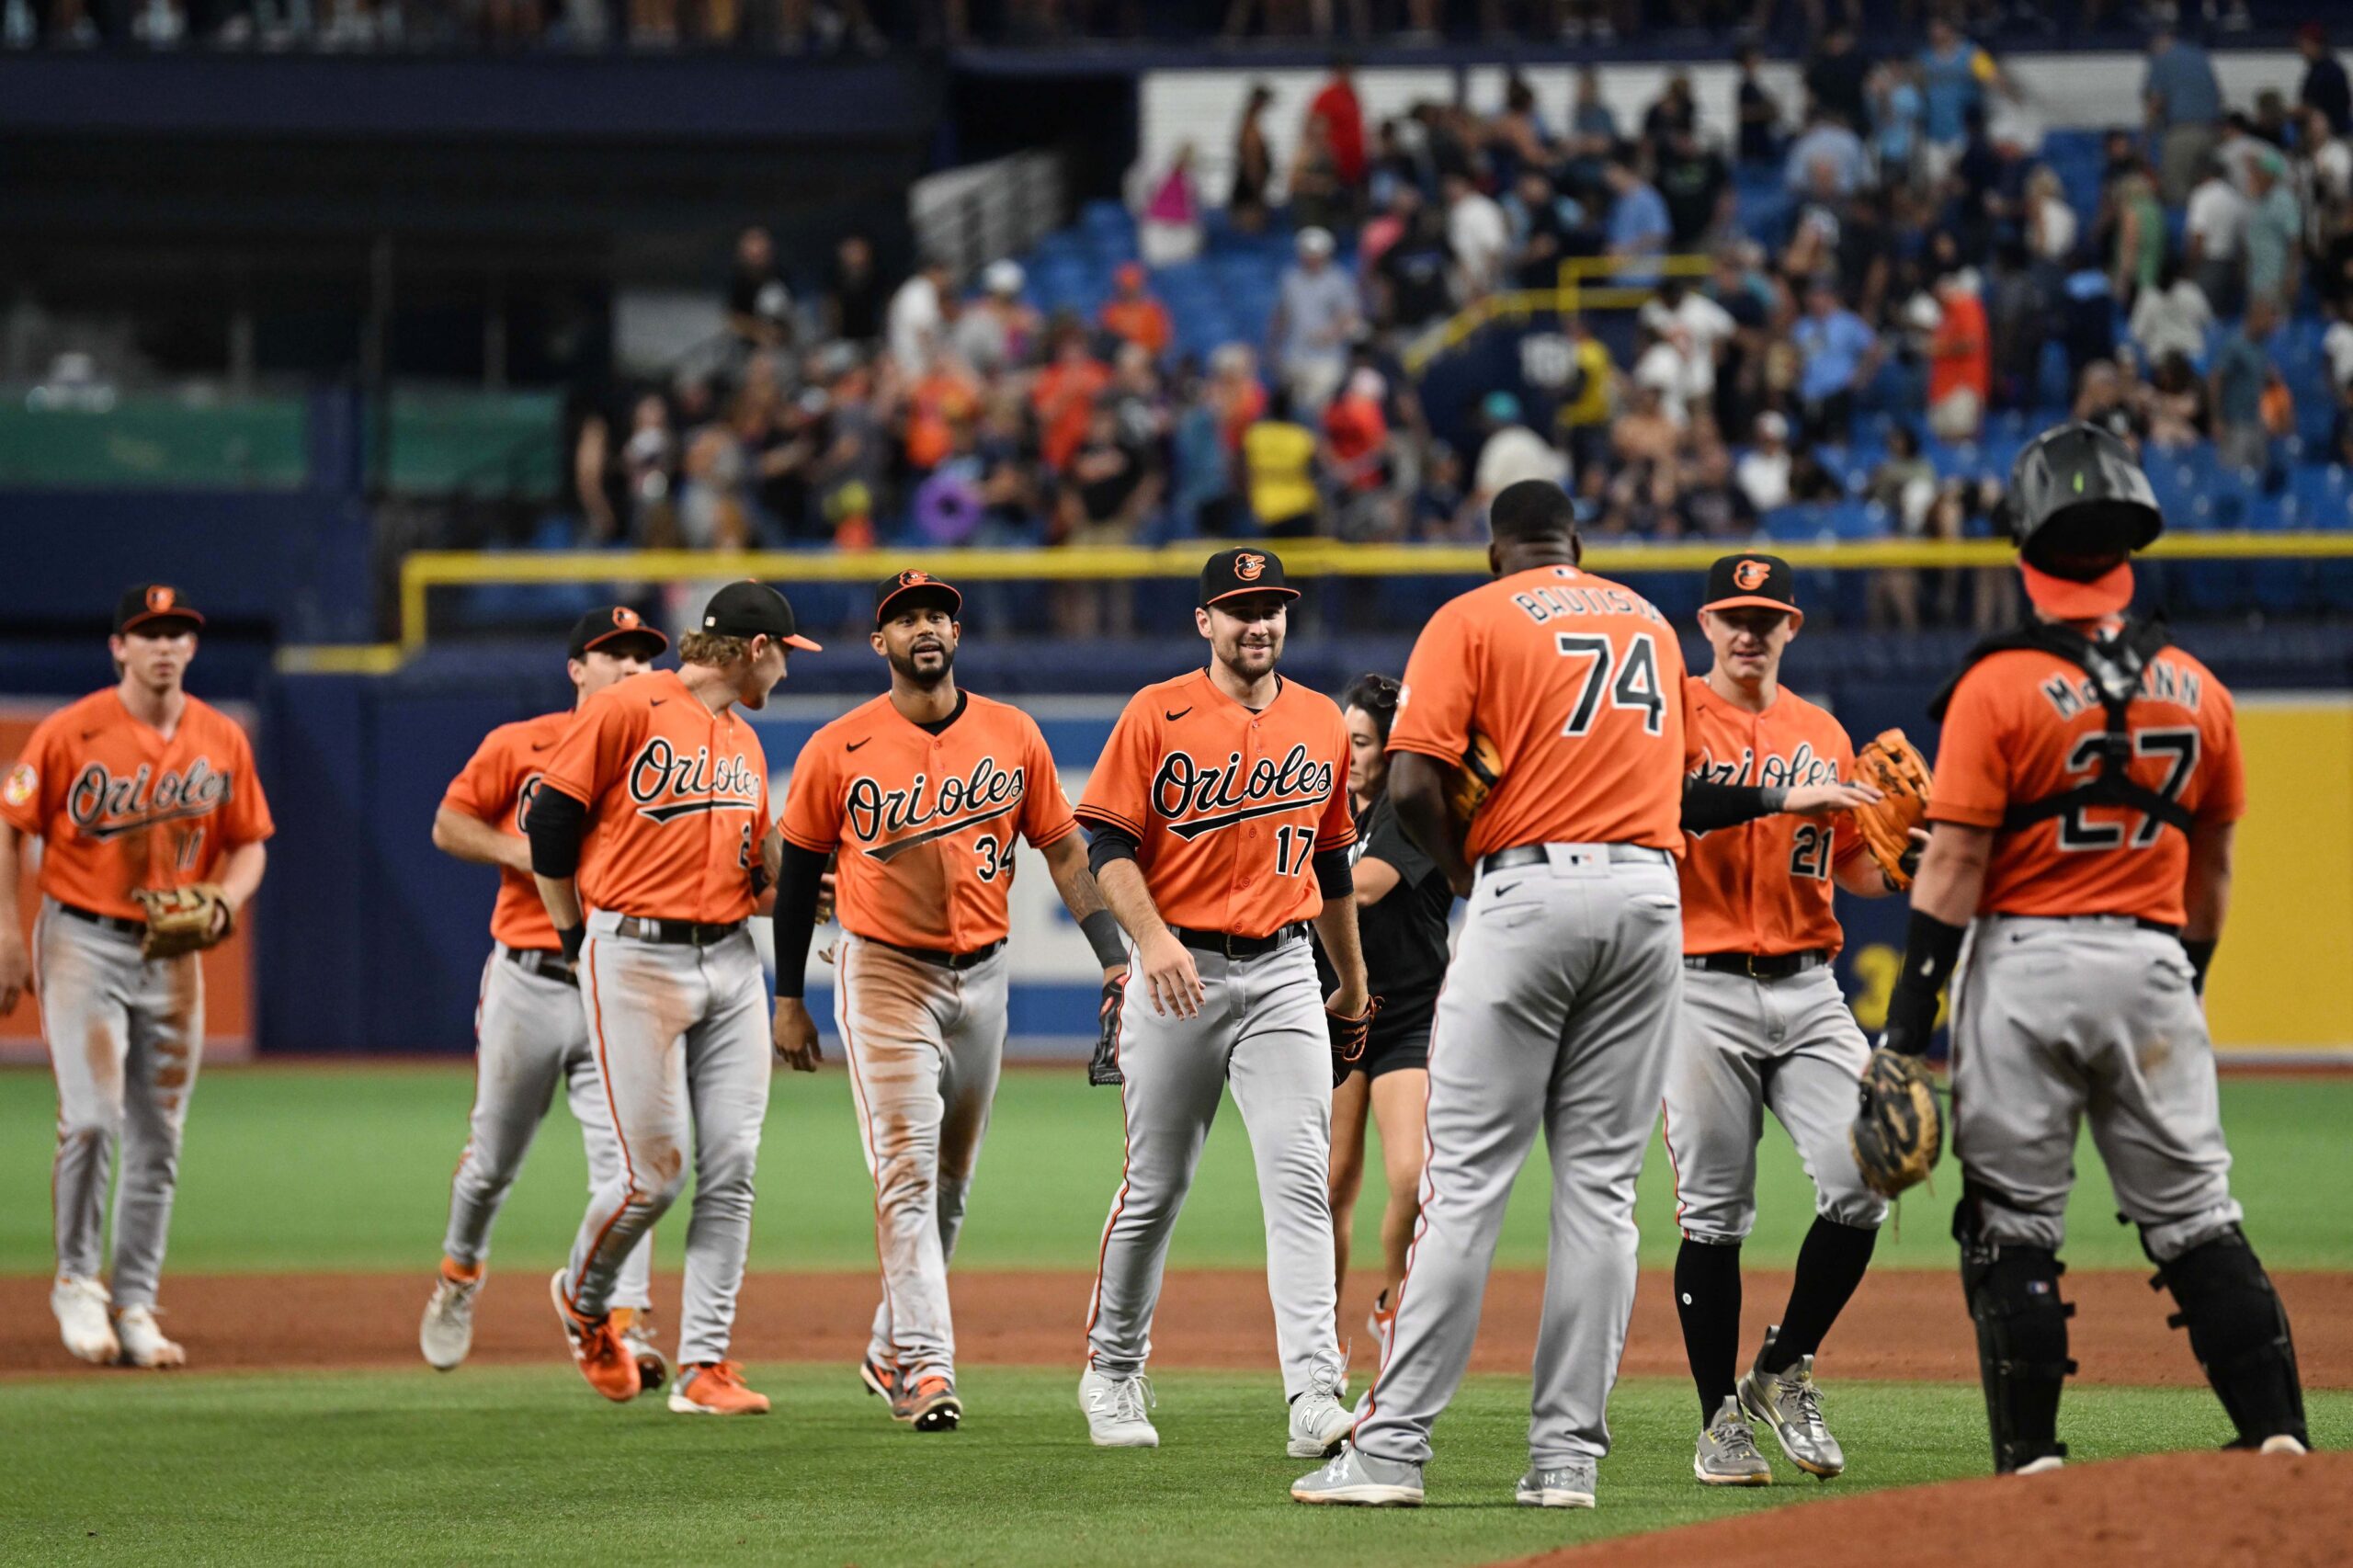 Orioles win division thriller over Rays, 6-5, on O'Hearn's 9th